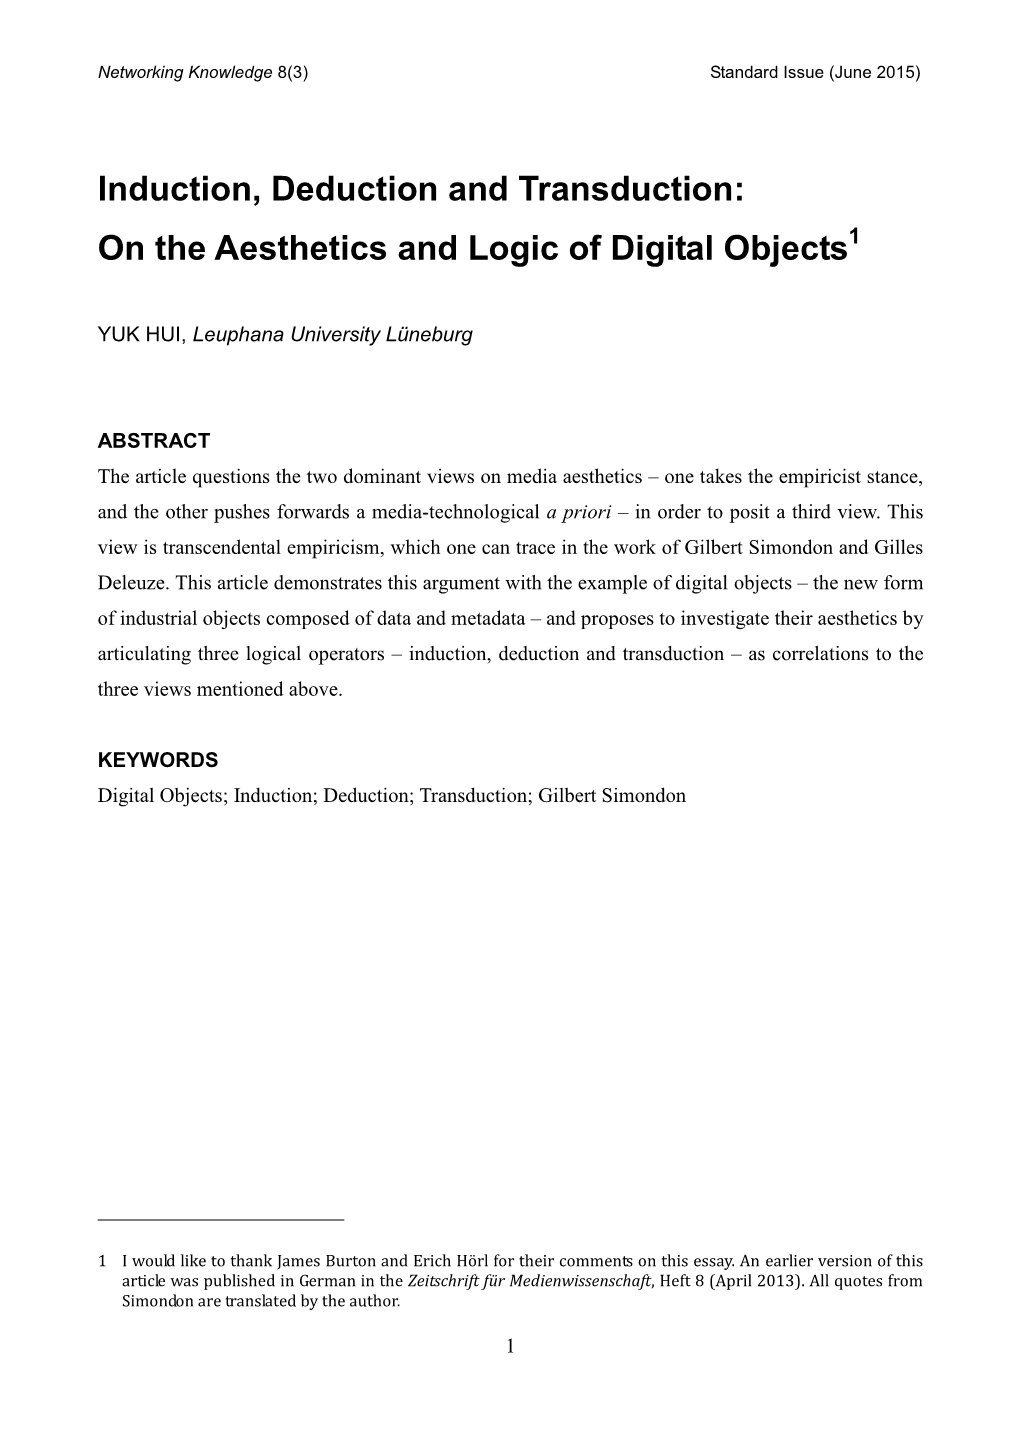 Induction, Deduction and Transduction: on the Aesthetics and Logic of Digital Objects1